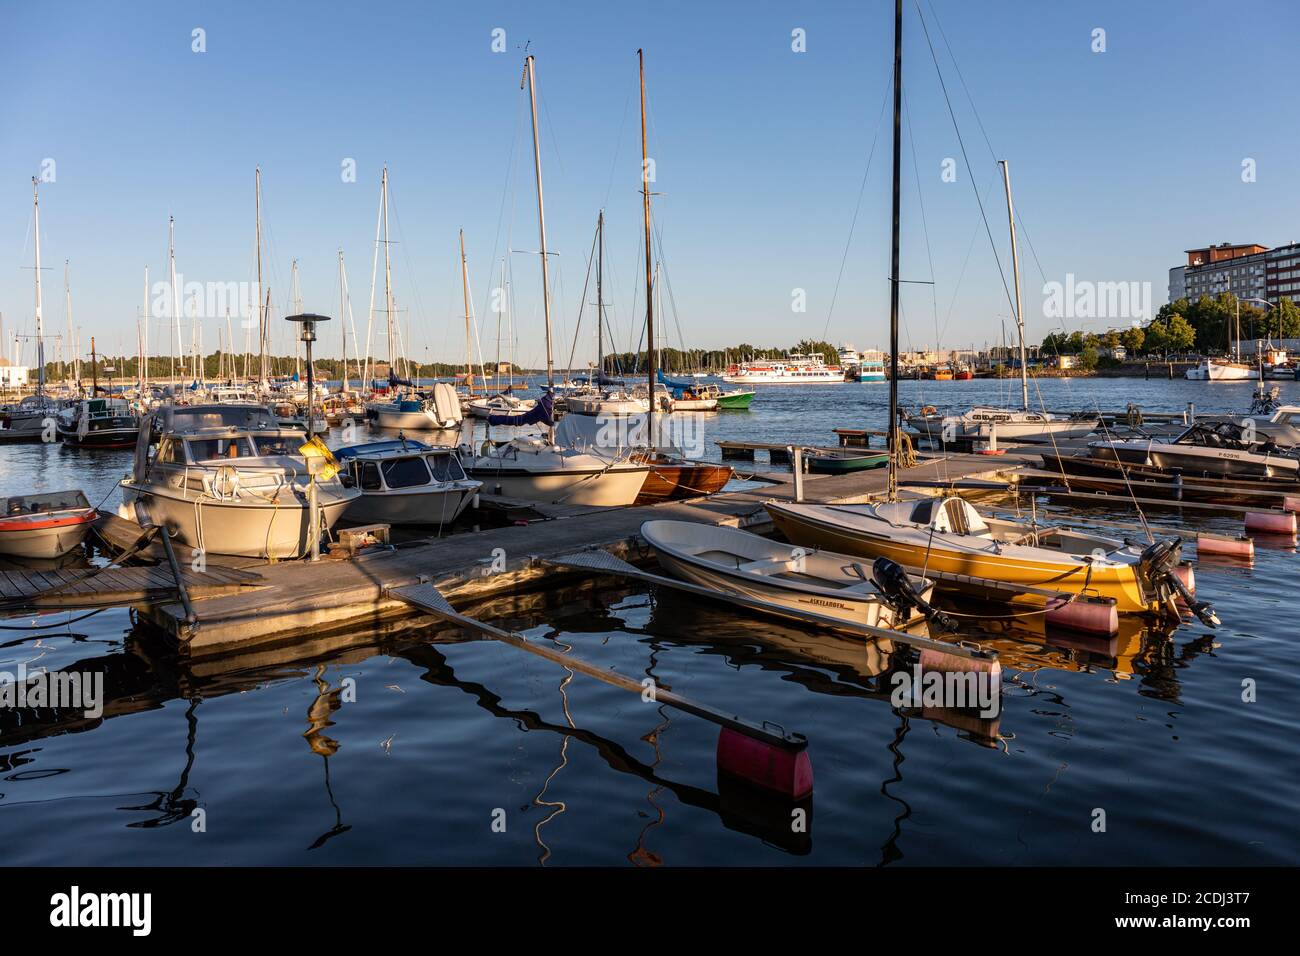 Sailing boats and motorboats basking in the evening sun in Merihaka district of Helsinki, Finland Stock Photo